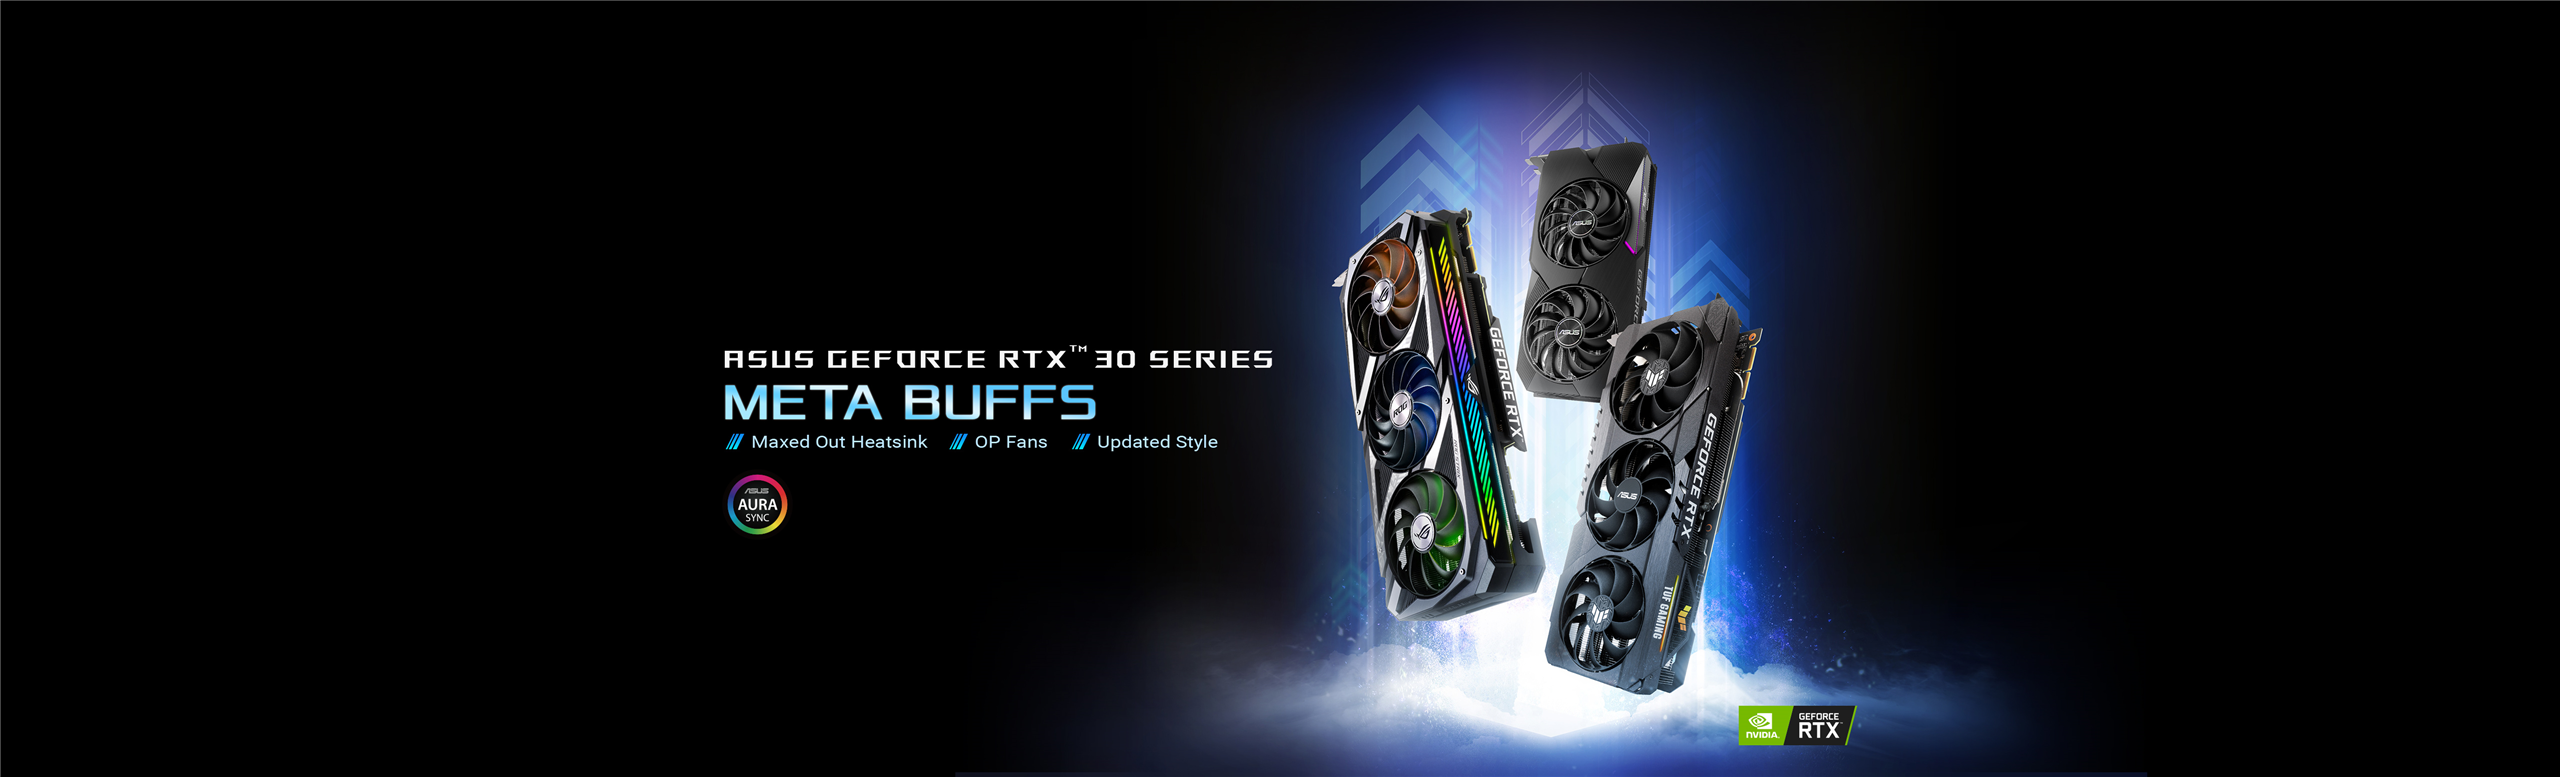 ROG Strix, TUF Gaming and ASUS Dual Geforce RTX™ 30 series graphics card lineup photo